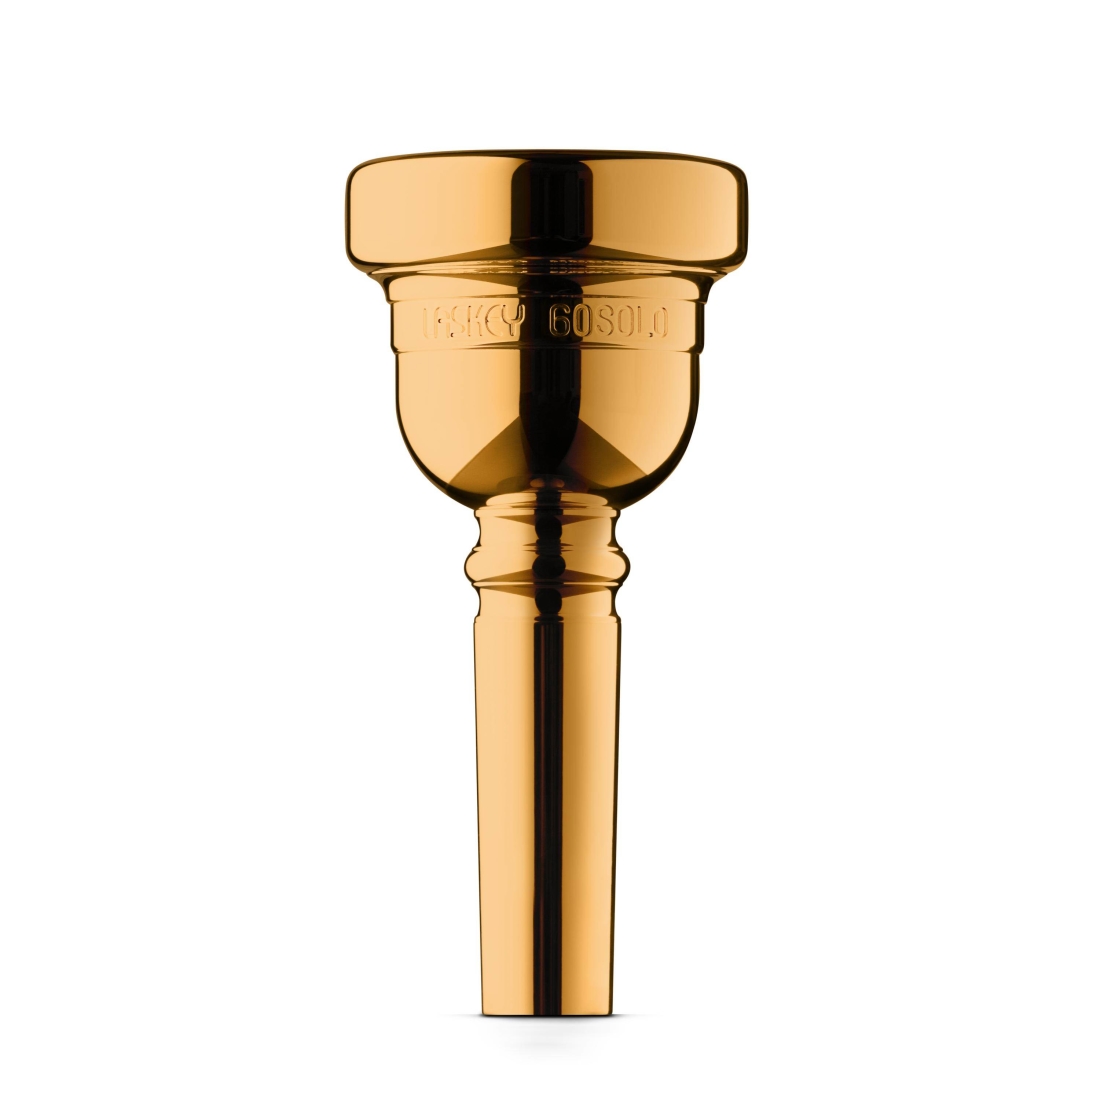 Alessi 60 SOLO Trombone Mouthpiece - Gold Plated